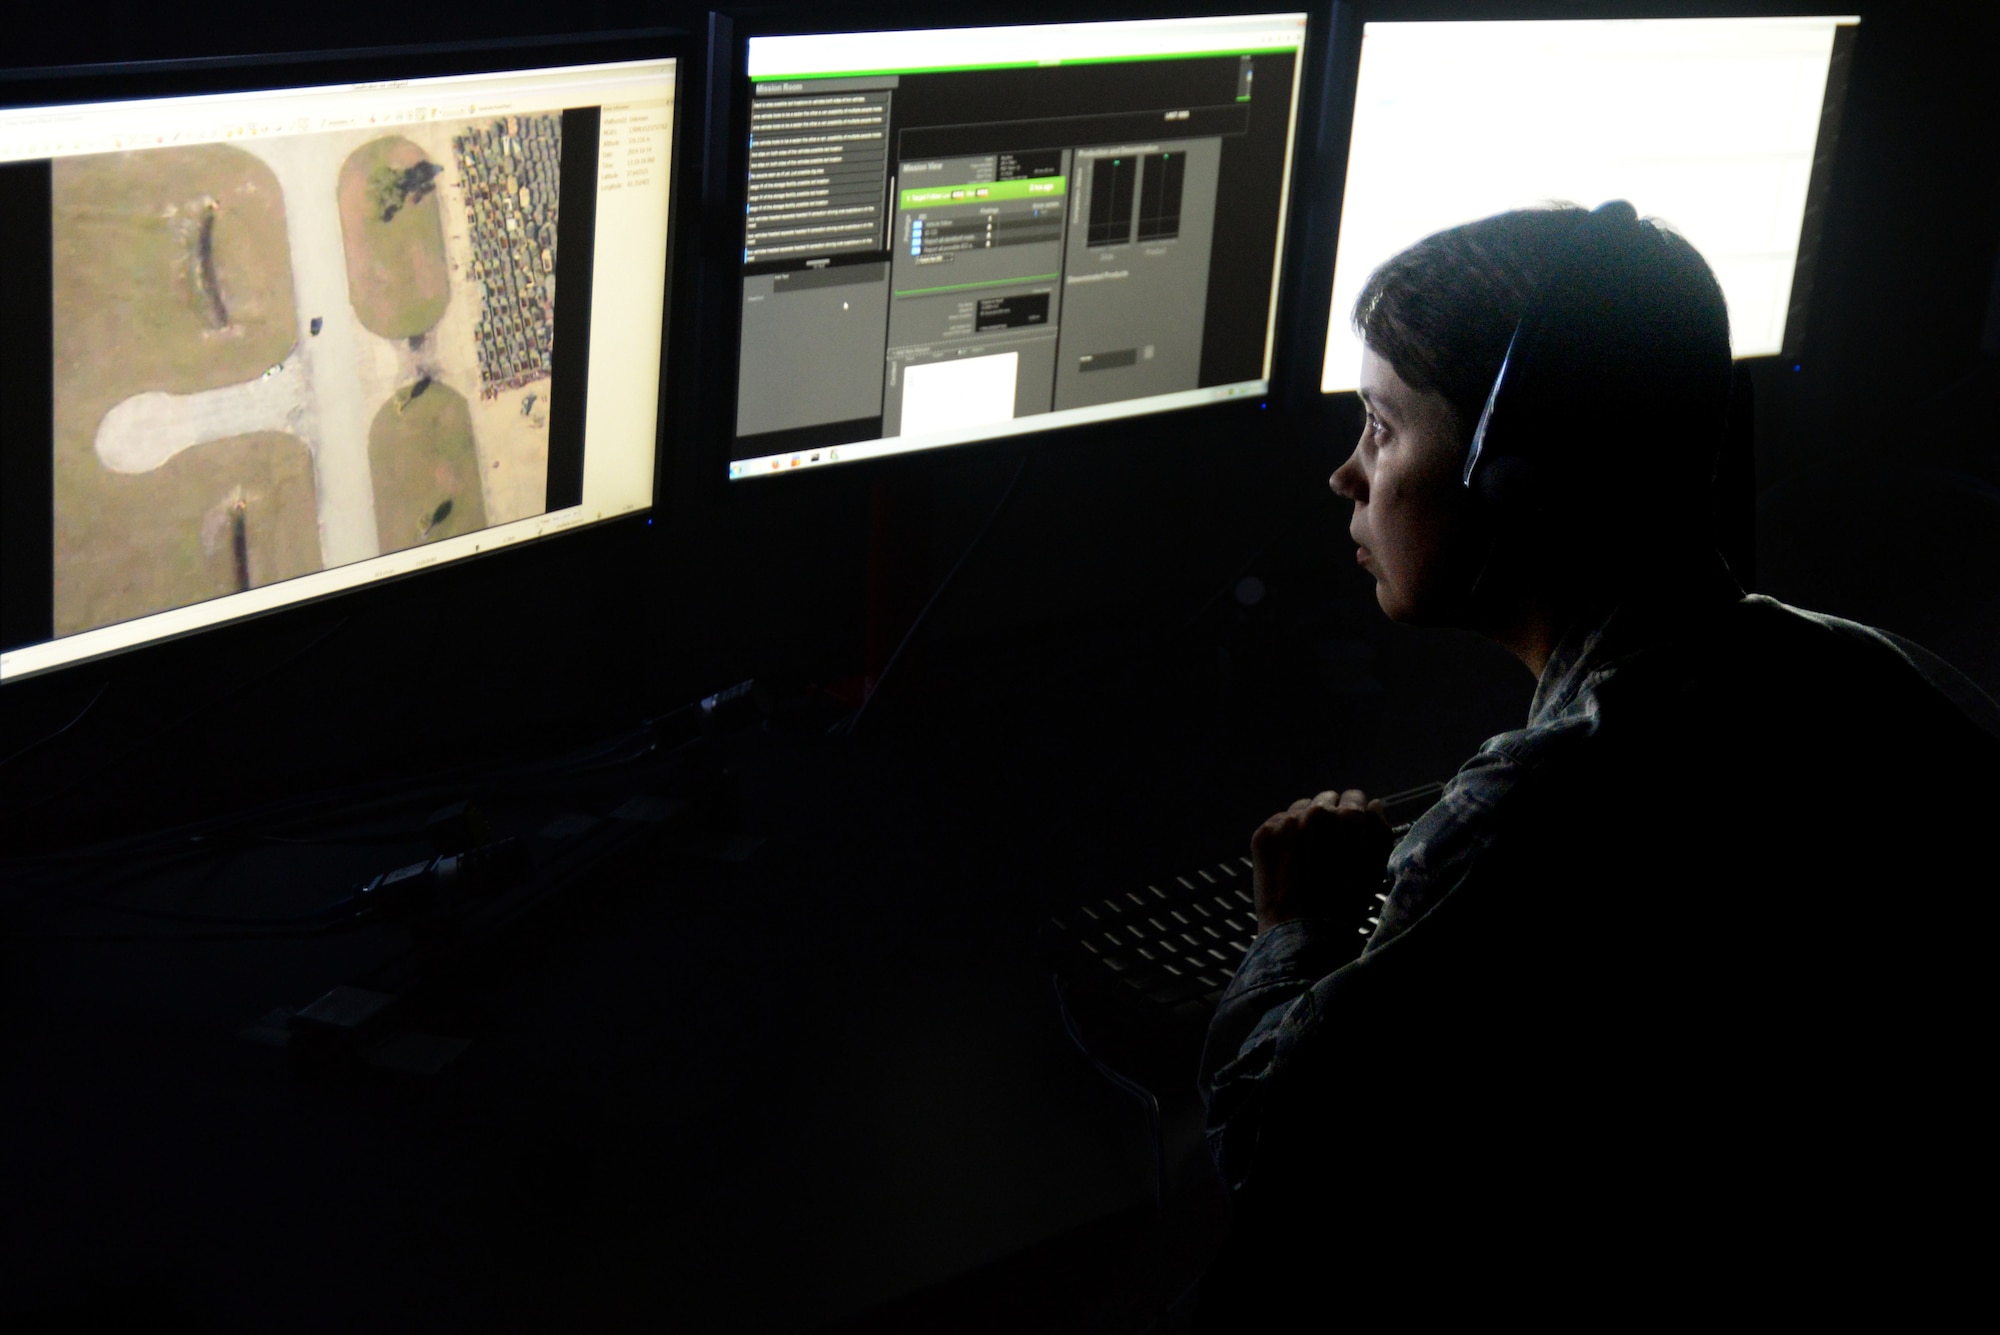 U.S. Air Force 1st Lt. Amanda Chichester, 711th Human Performance Wing behavioral scientist, watches a video loop for suspicious behavior during a demonstration of a new Enhanced Reporting, Narrative Event Streaming Tool developed by the Air Force Research Lab at Wright-Patterson Air Force Base, Ohio, Oct. 15, 2014.  The program streamlines some routine tasks performed by intelligence analysts in an effort to increase their overall effectiveness and productivity. (U.S. Air Force photo by Wesley Farnsworth)